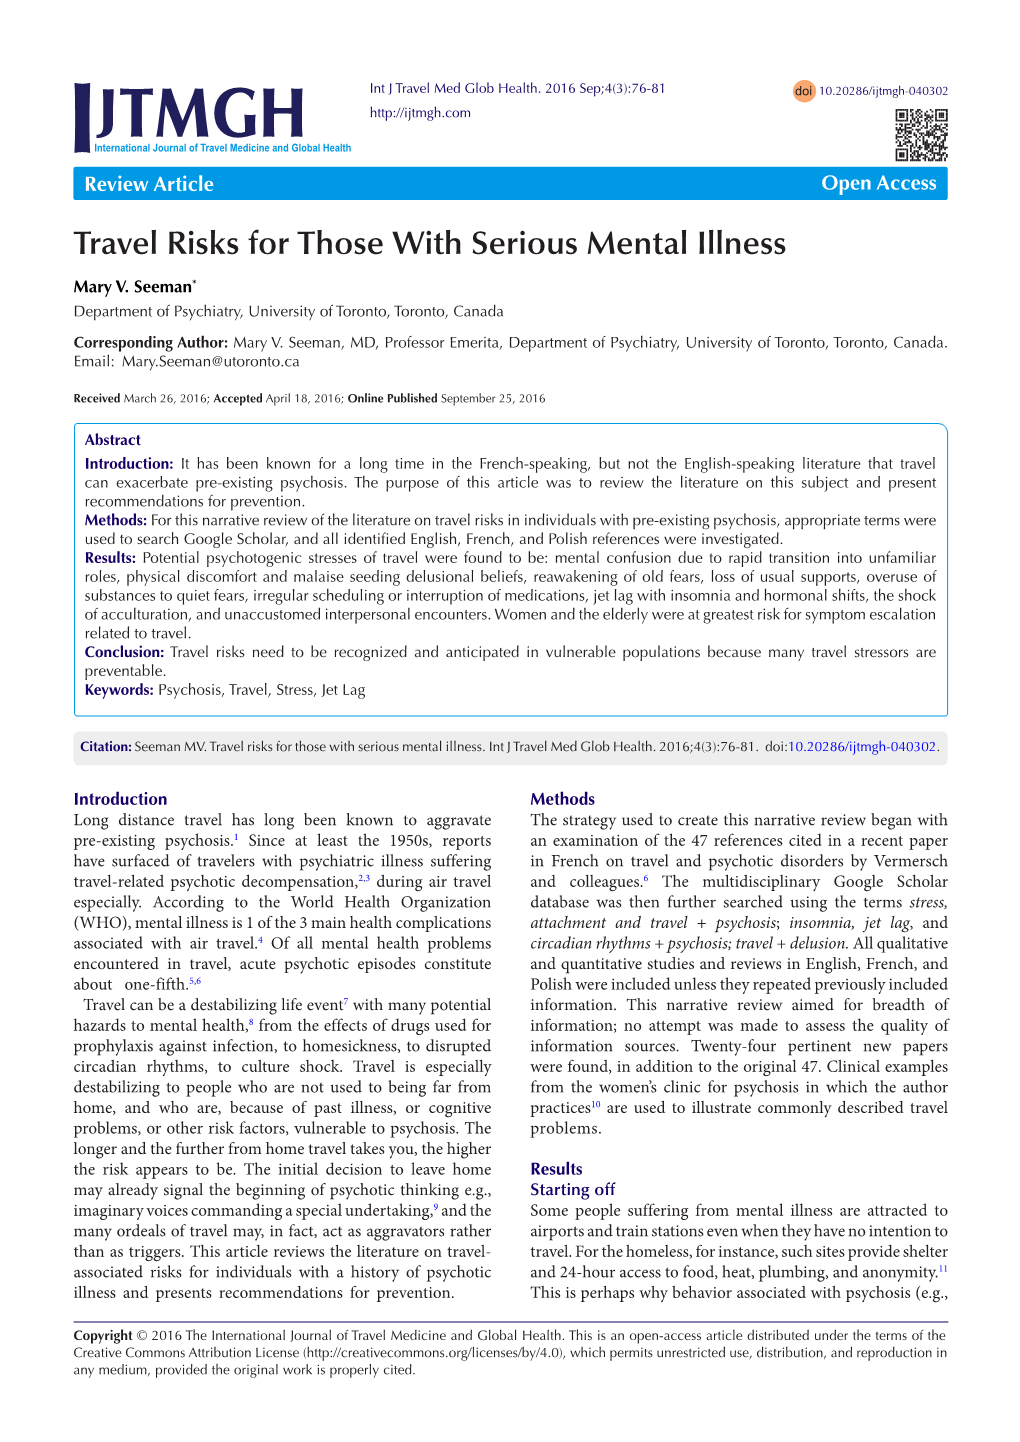 Travel Risks for Those with Serious Mental Illness